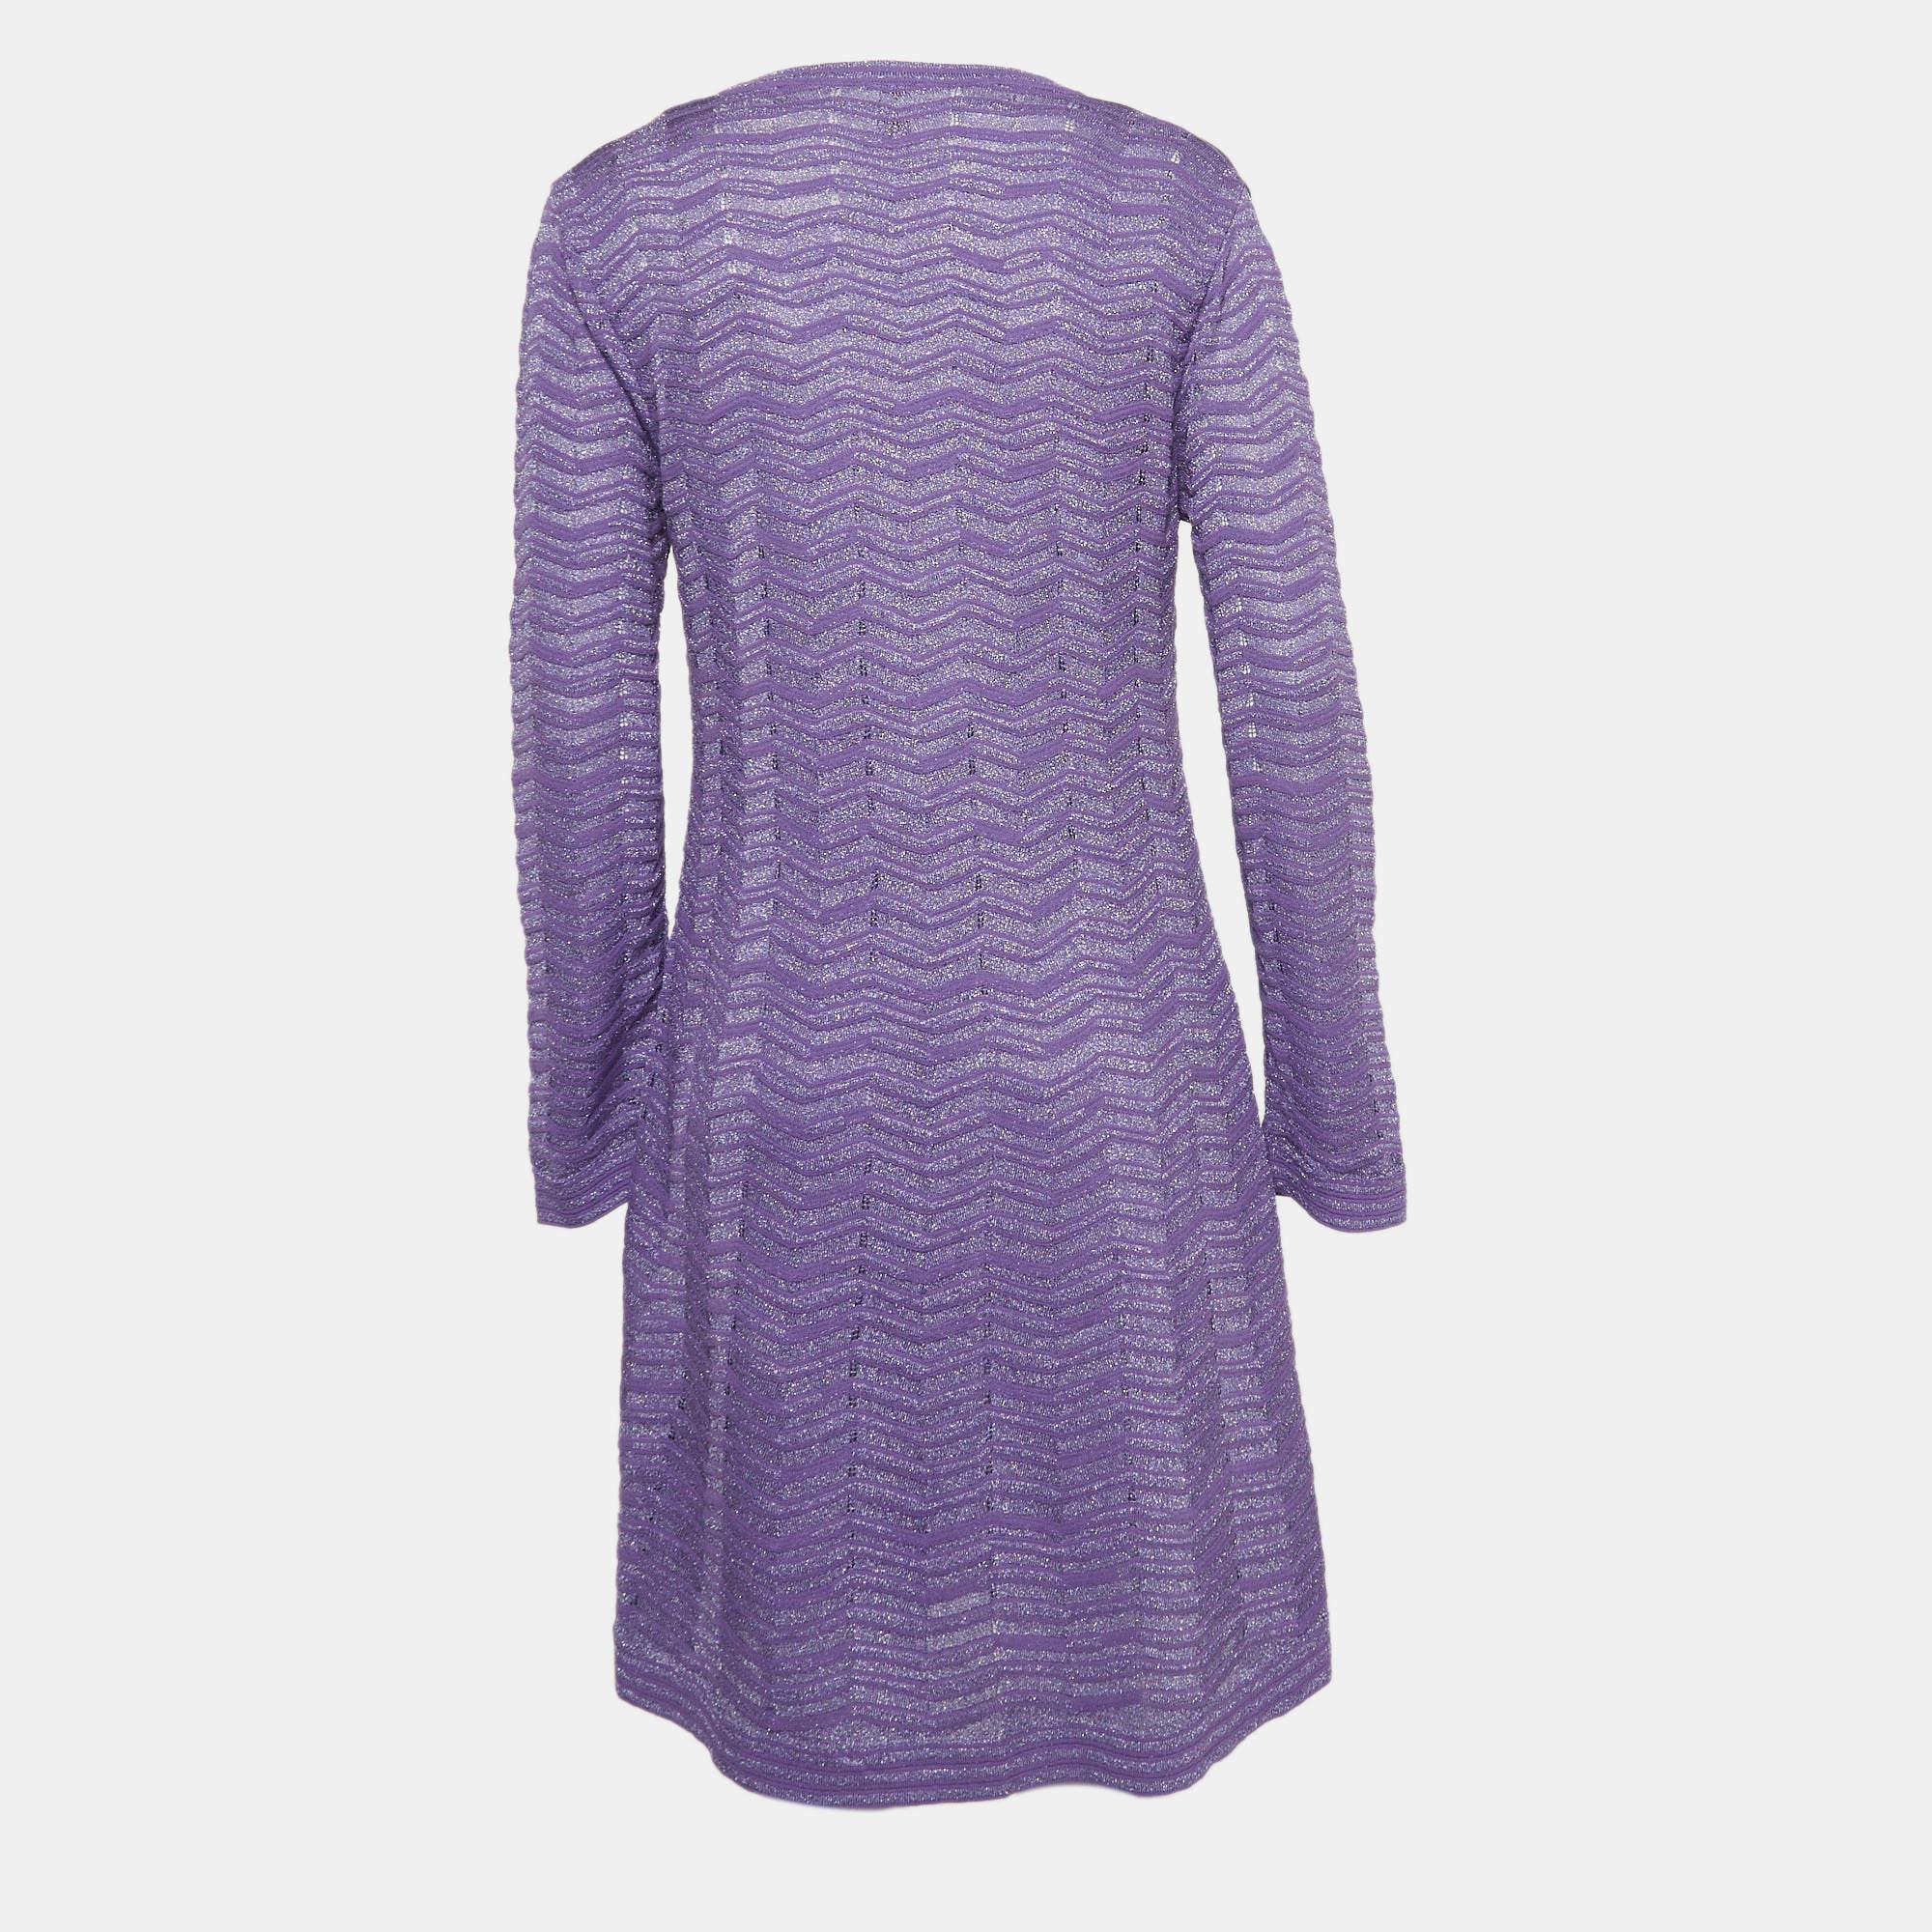 Step into timeless elegance with this M Missoni dress. Meticulously crafted, it embodies grace and sophistication, making it the perfect choice for those seeking an exquisite wardrobe addition.

